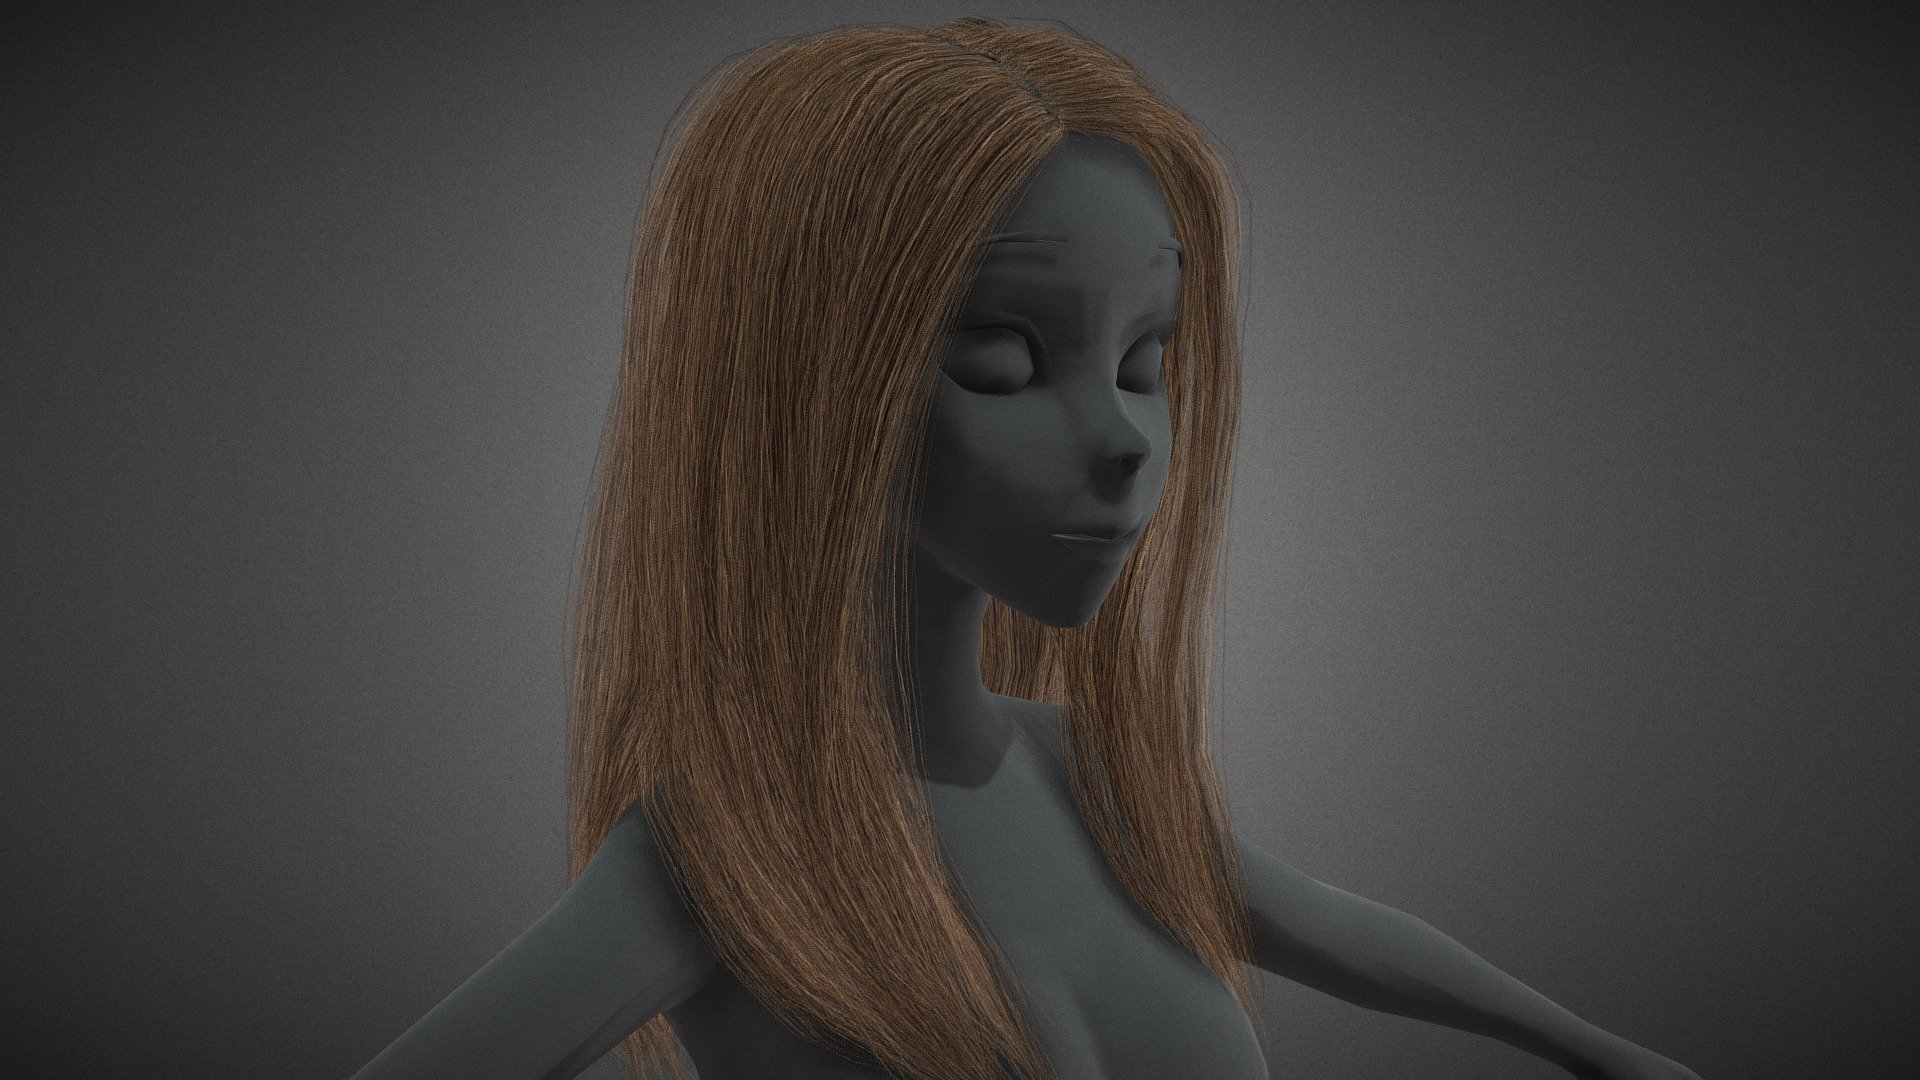 CG StudioX Present :
Female Hair Cards Style 5 - Long Hair 2 lowpoly/PBR




The photo been rendered using Marmoset Toolbag 4 (real time game engine )

The head model is decimated to show how the hair looks on the head.


Features :



Comes with Specular and Metalness PBR 4K texture .

Good topology.

Low polygon geometry.

The Model is prefect for game for both Specular workflow as in Unity and Metalness as in Unreal engine .

The model also rendered using Marmoset Toolbag 4 with both Specular and Metalness PBR and also included in the product with the full texture.

The texture can be easily adjustable .


Texture :



One set of UV for the Hair [Albedo -Normal-Metalness -Roughness-Gloss-Specular-Ao-Alpha-Depth-Direction-ID-Root] (4096*4096).

One set of UV for the Cap [Albedo -Normal-Metalness -Roughness-Gloss-Specular-Alpha] (4096*4096).


Files :
Marmoset Toolbag 4 ,Maya,,FBX,glTF,Blender,OBj with all the textures.




Contact me for if you have any questions.
 - Female Hair Cards Style 5 - Long Hair 2 - Buy Royalty Free 3D model by CG StudioX (@CG_StudioX) 3d model